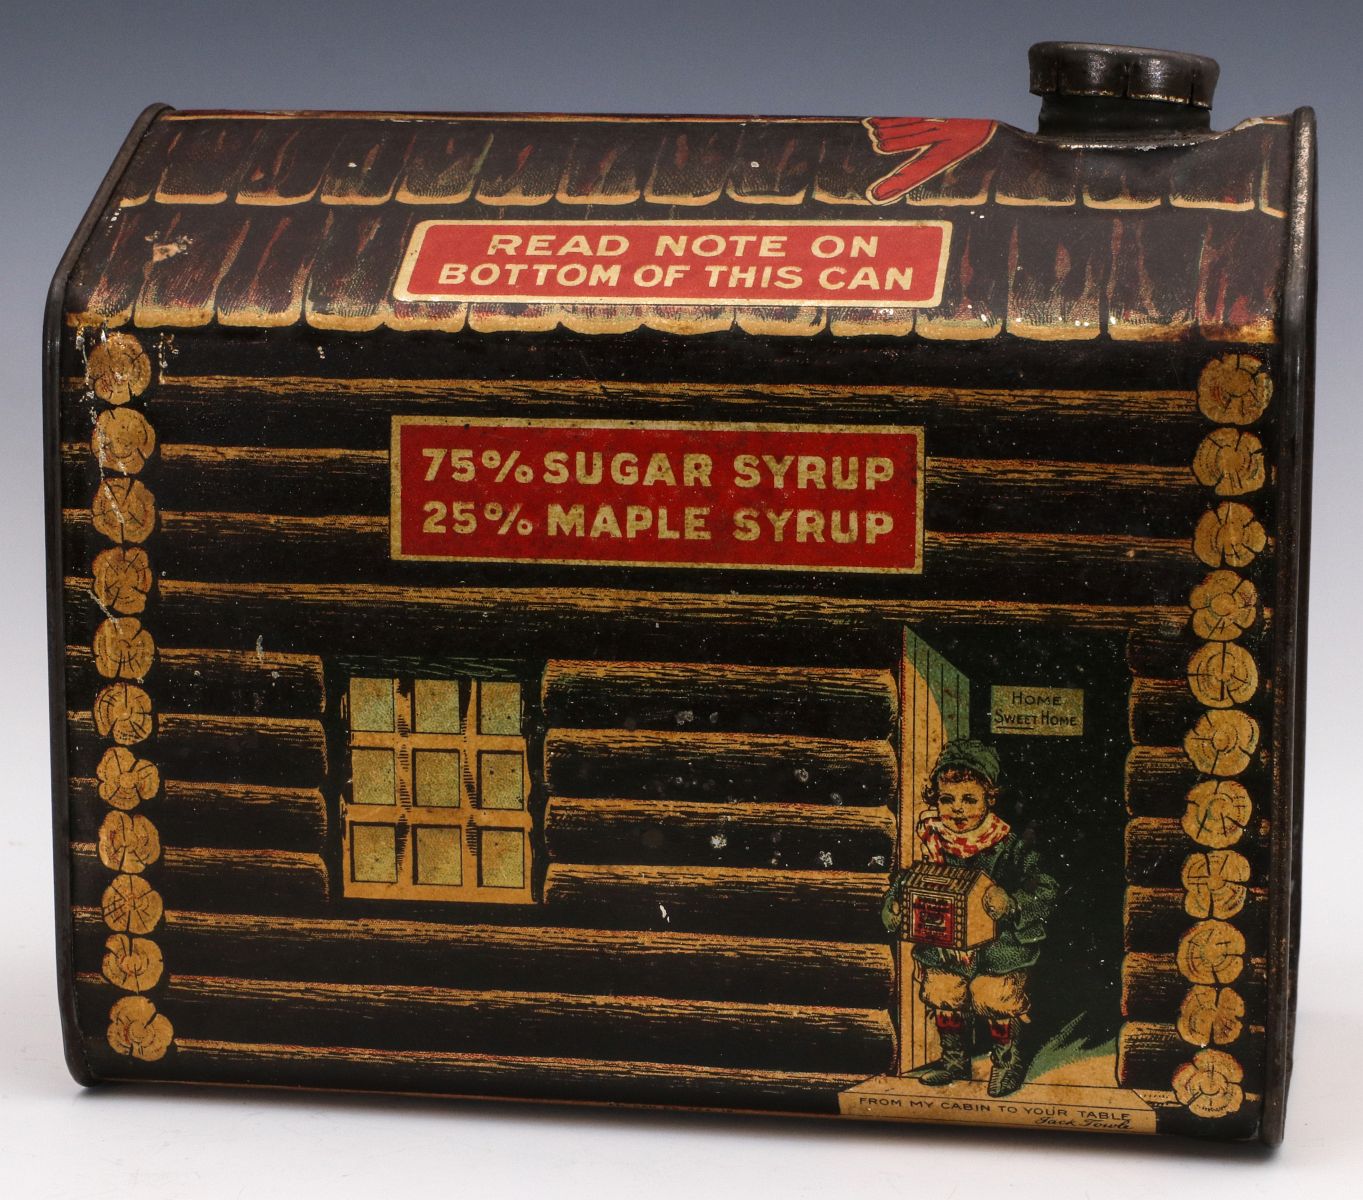 A GOOD EARLY LARGE SIZE LOG CABIN SYRUP CONTAINER